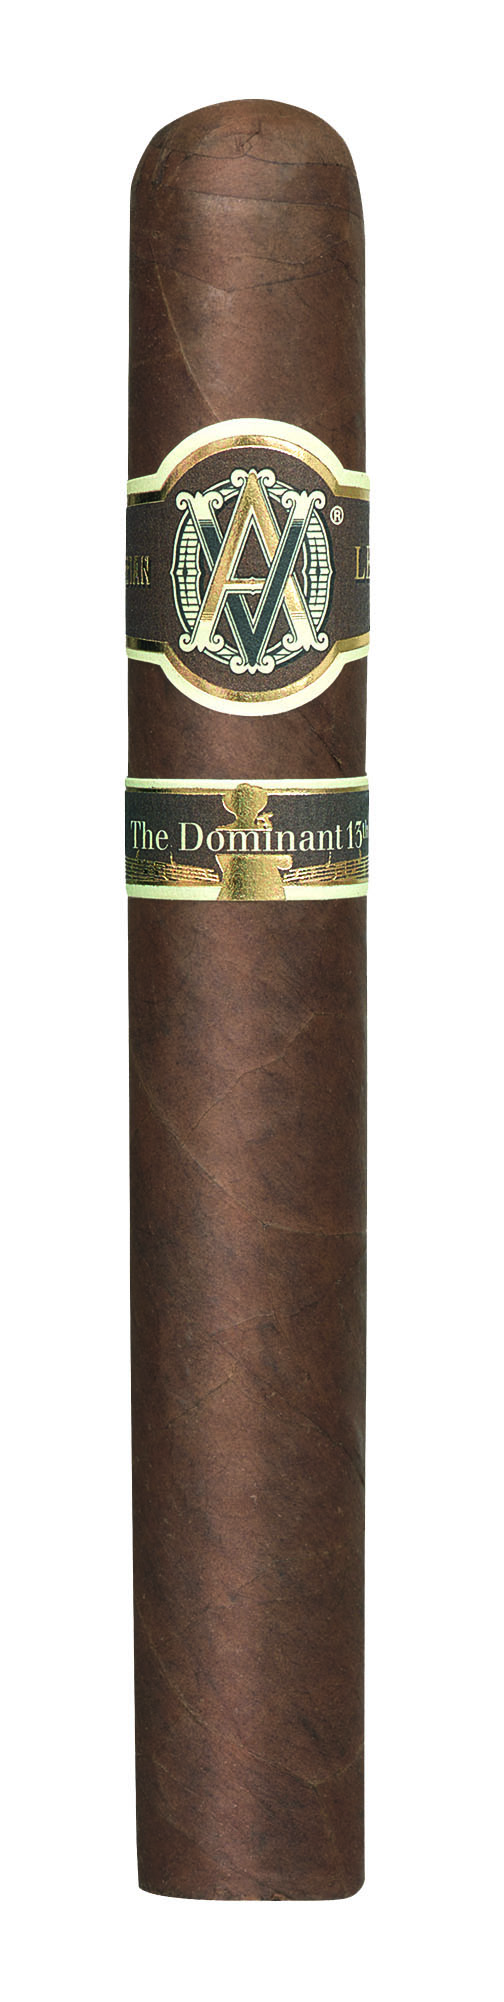 Avo_the-Dominant-13th_product3